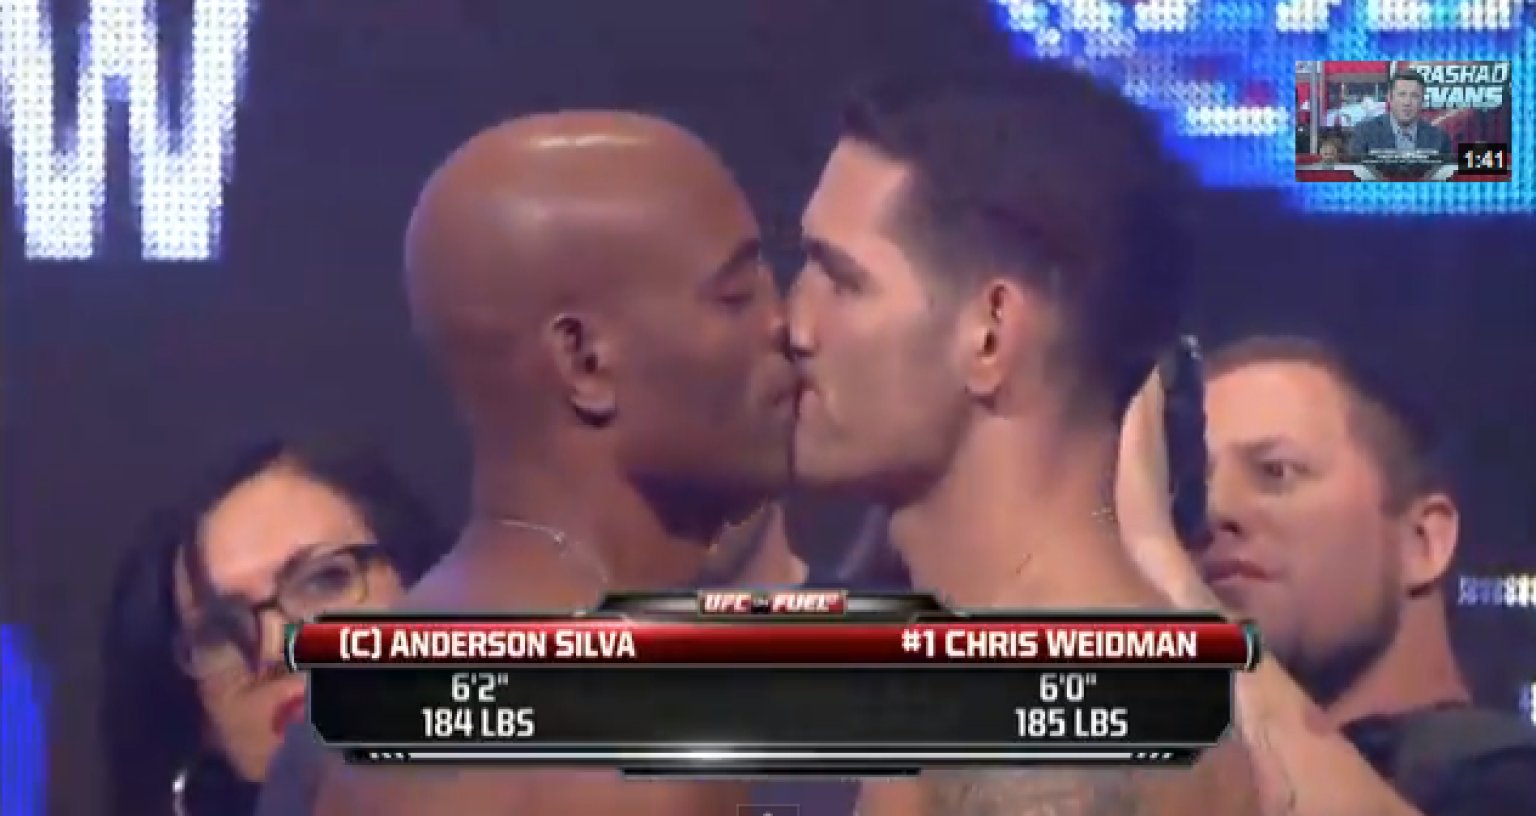 Anderson Silva And Chris Weidman Ufc Fighters Share Kiss At Weigh 2609